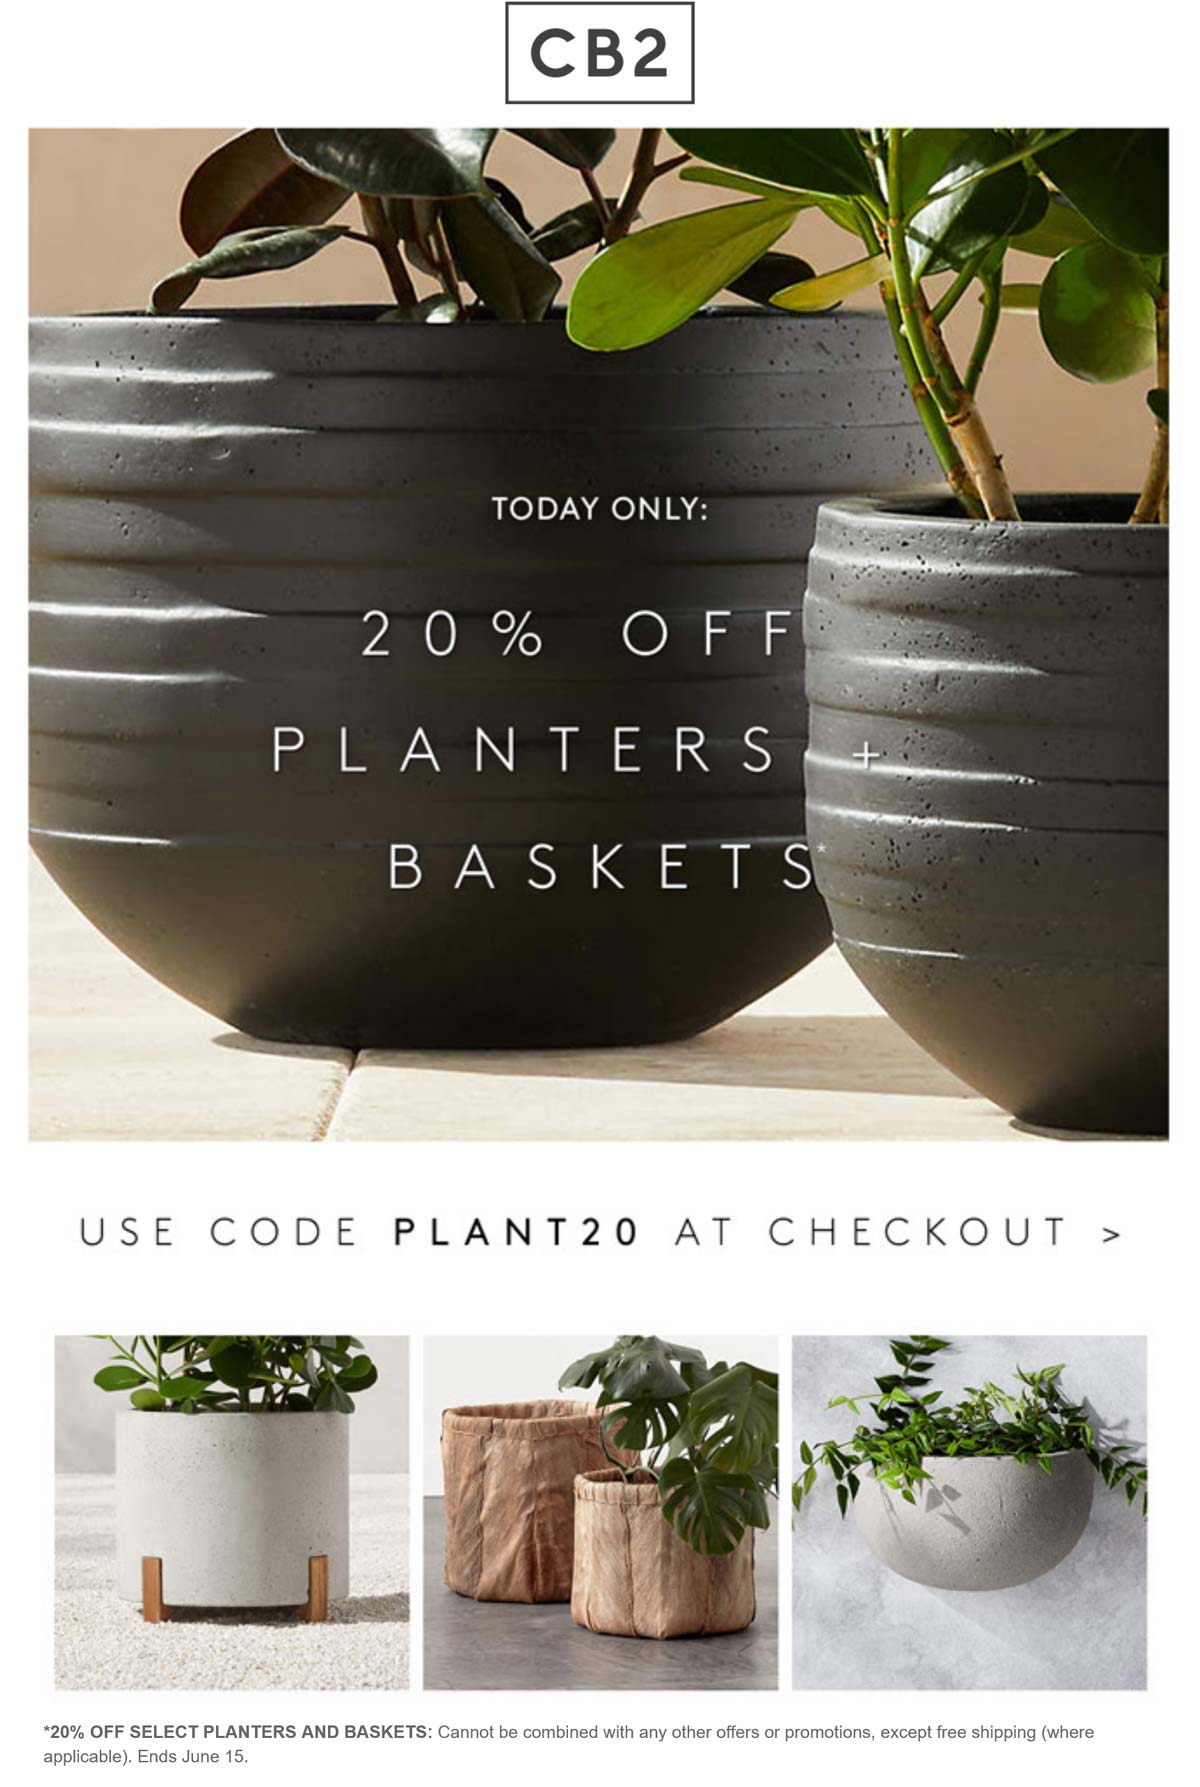 CB2 stores Coupon  20% off planters & baskets today at Crate & Barrel CB2 via promo code PLANT20 #cb2 